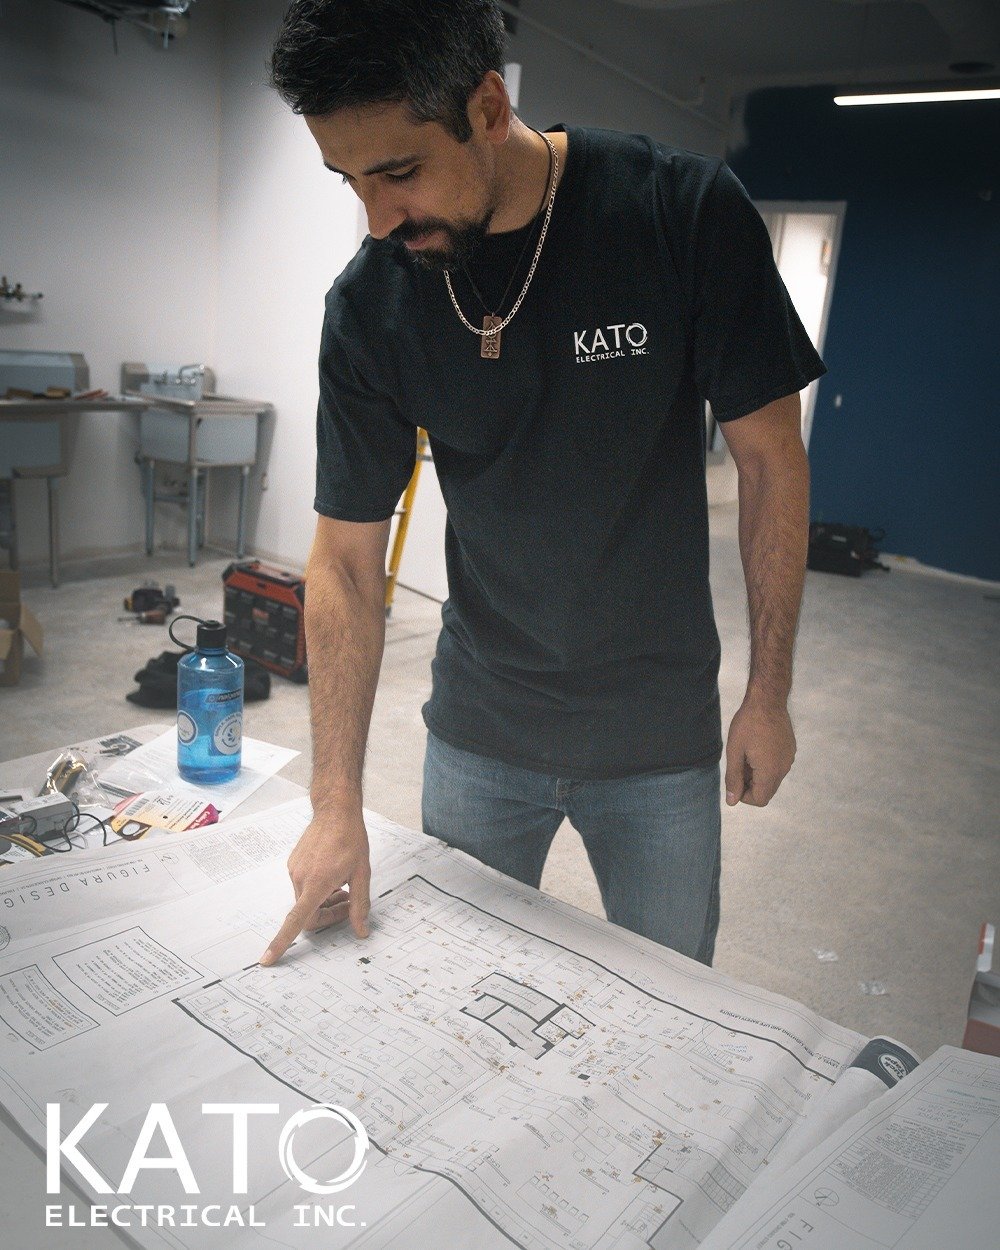 Planning is the key to successful projects! Our skilled team member is seen carefully reviewing blueprints for this job. This attention to detail ensures we meet our clients' needs and deliver top-quality results everytime.

#projectplanning #bluepri